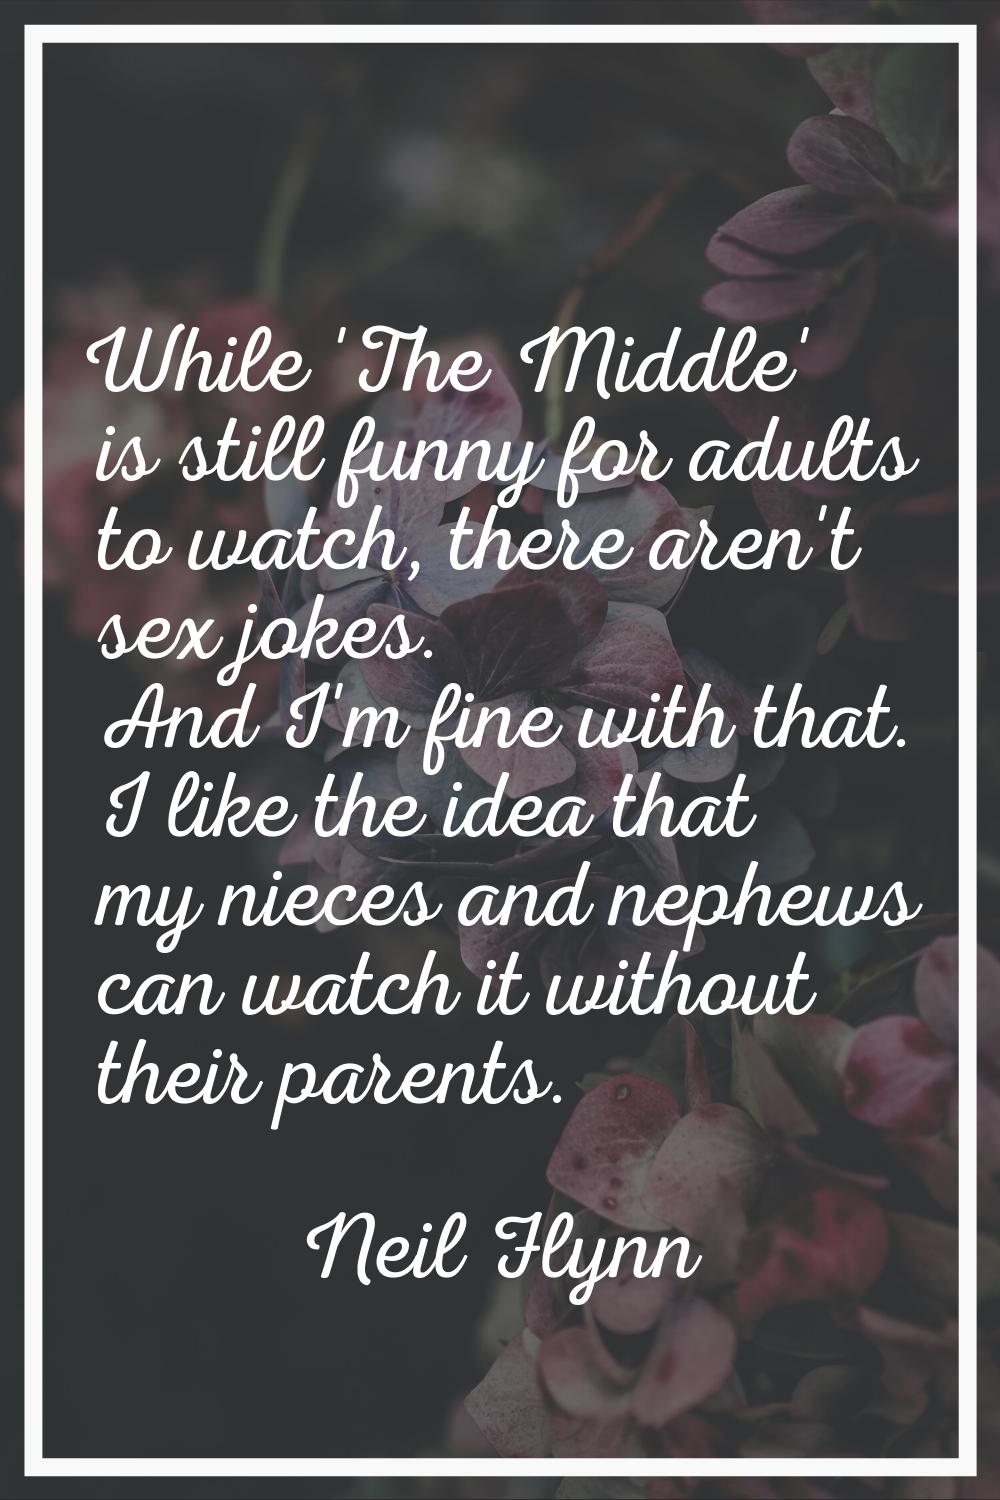 While 'The Middle' is still funny for adults to watch, there aren't sex jokes. And I'm fine with th